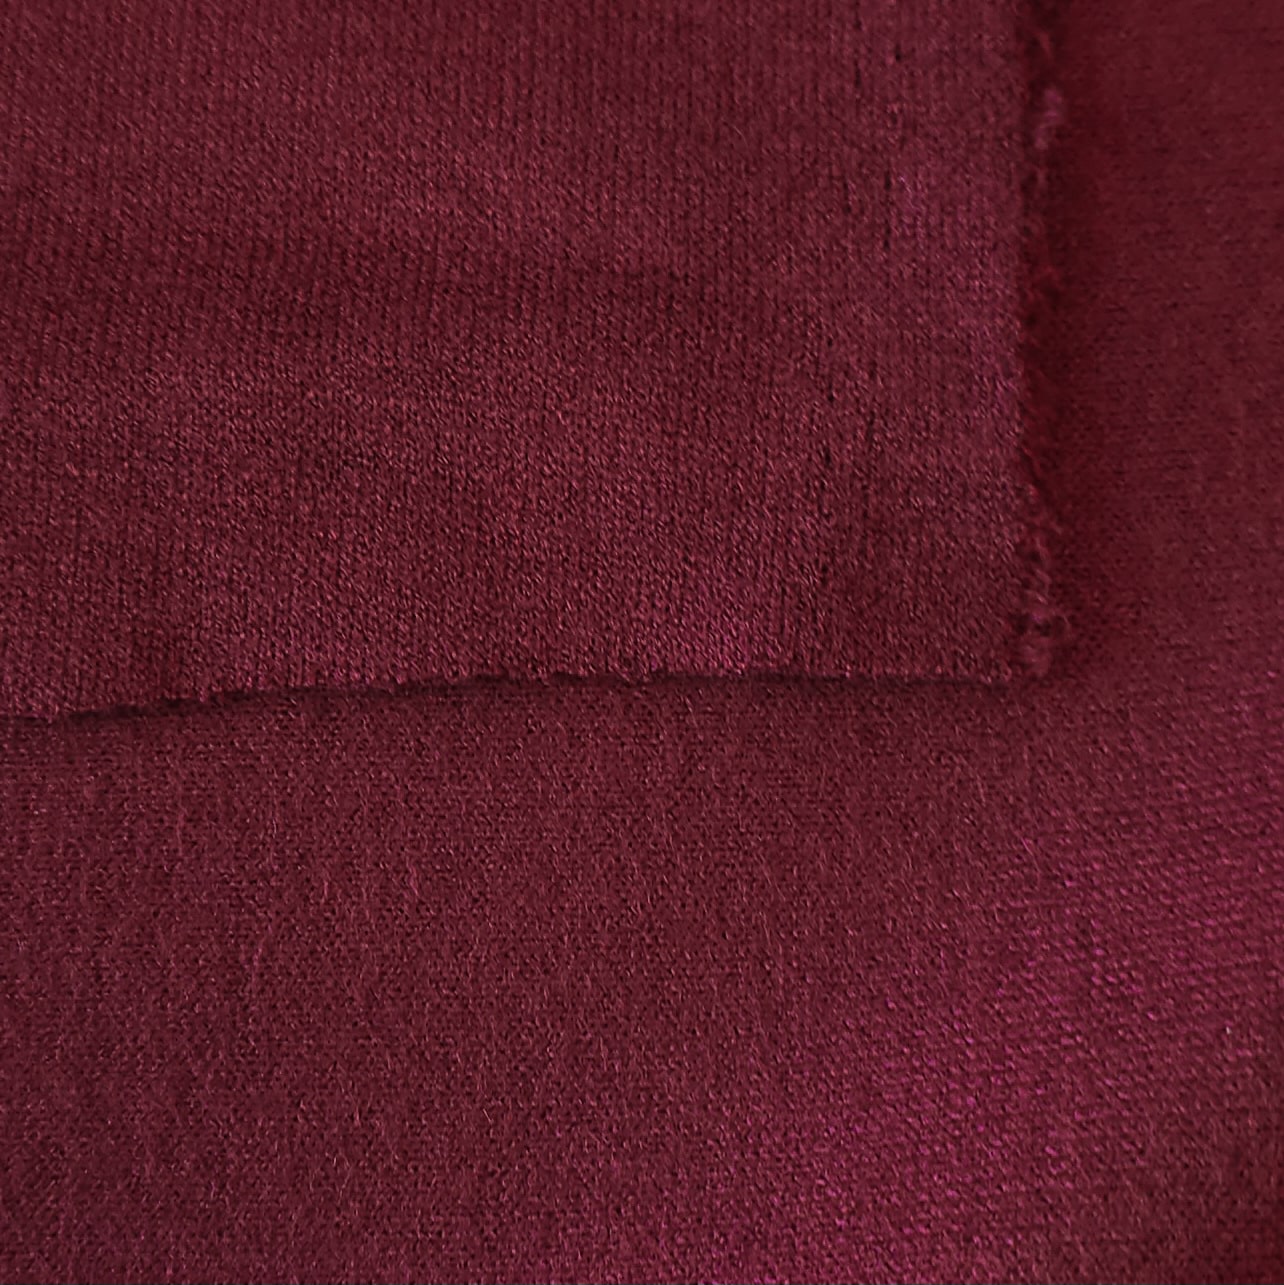 Polyester / Cotton Blended Knitted Fabric Suppliers 18155937